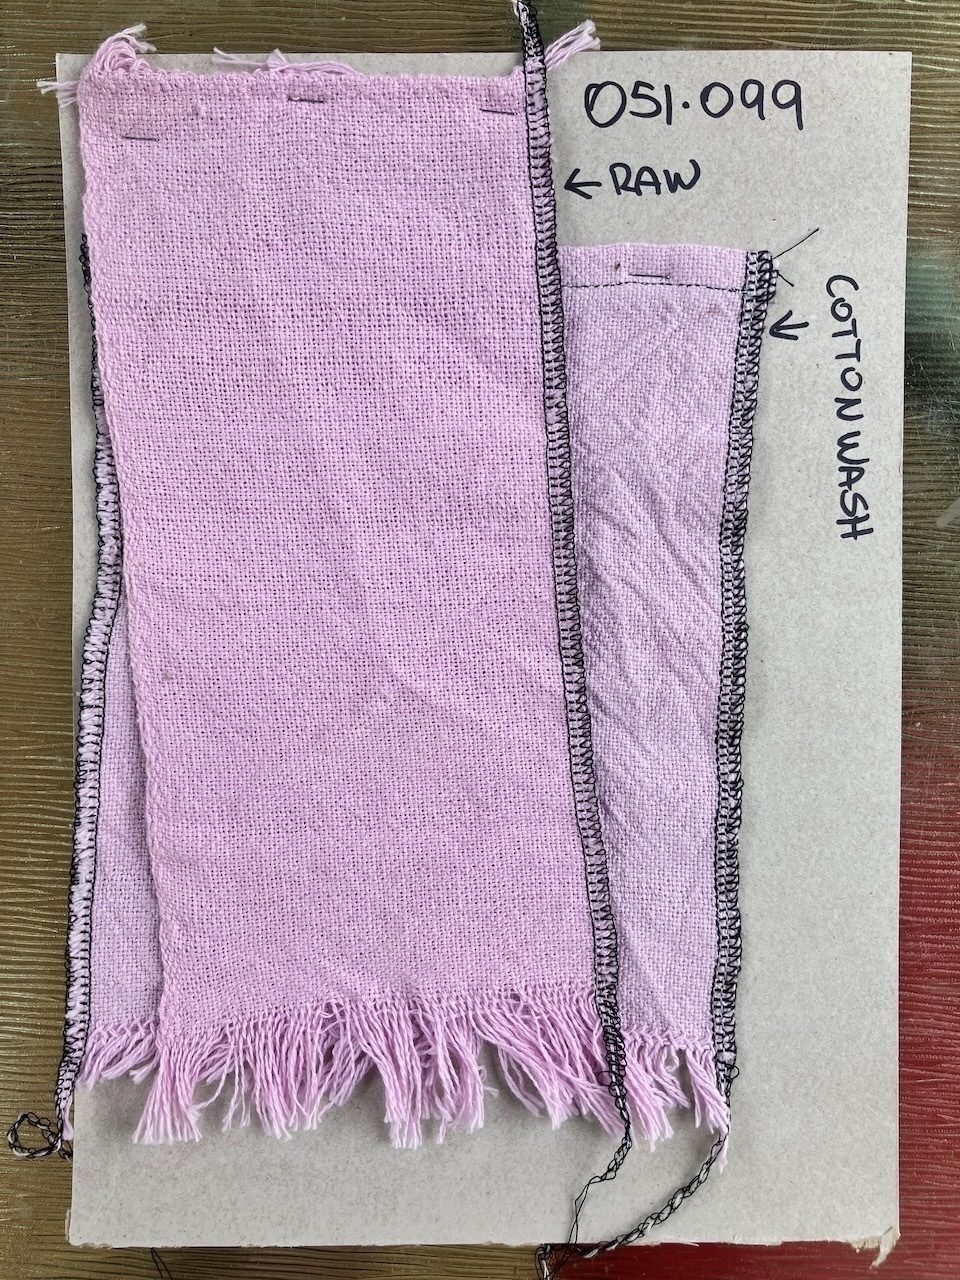 A piece of cardboard about the size of an A4 sheet of paper. There is a project number written in black Sharpie in the top right corner. The cardboard has two pieces of light pink, handwoven cloth stapled to it, one above the other. The one at the top is labelled 'raw'. The one underneath is labelled 'cotton wash'. End ID.